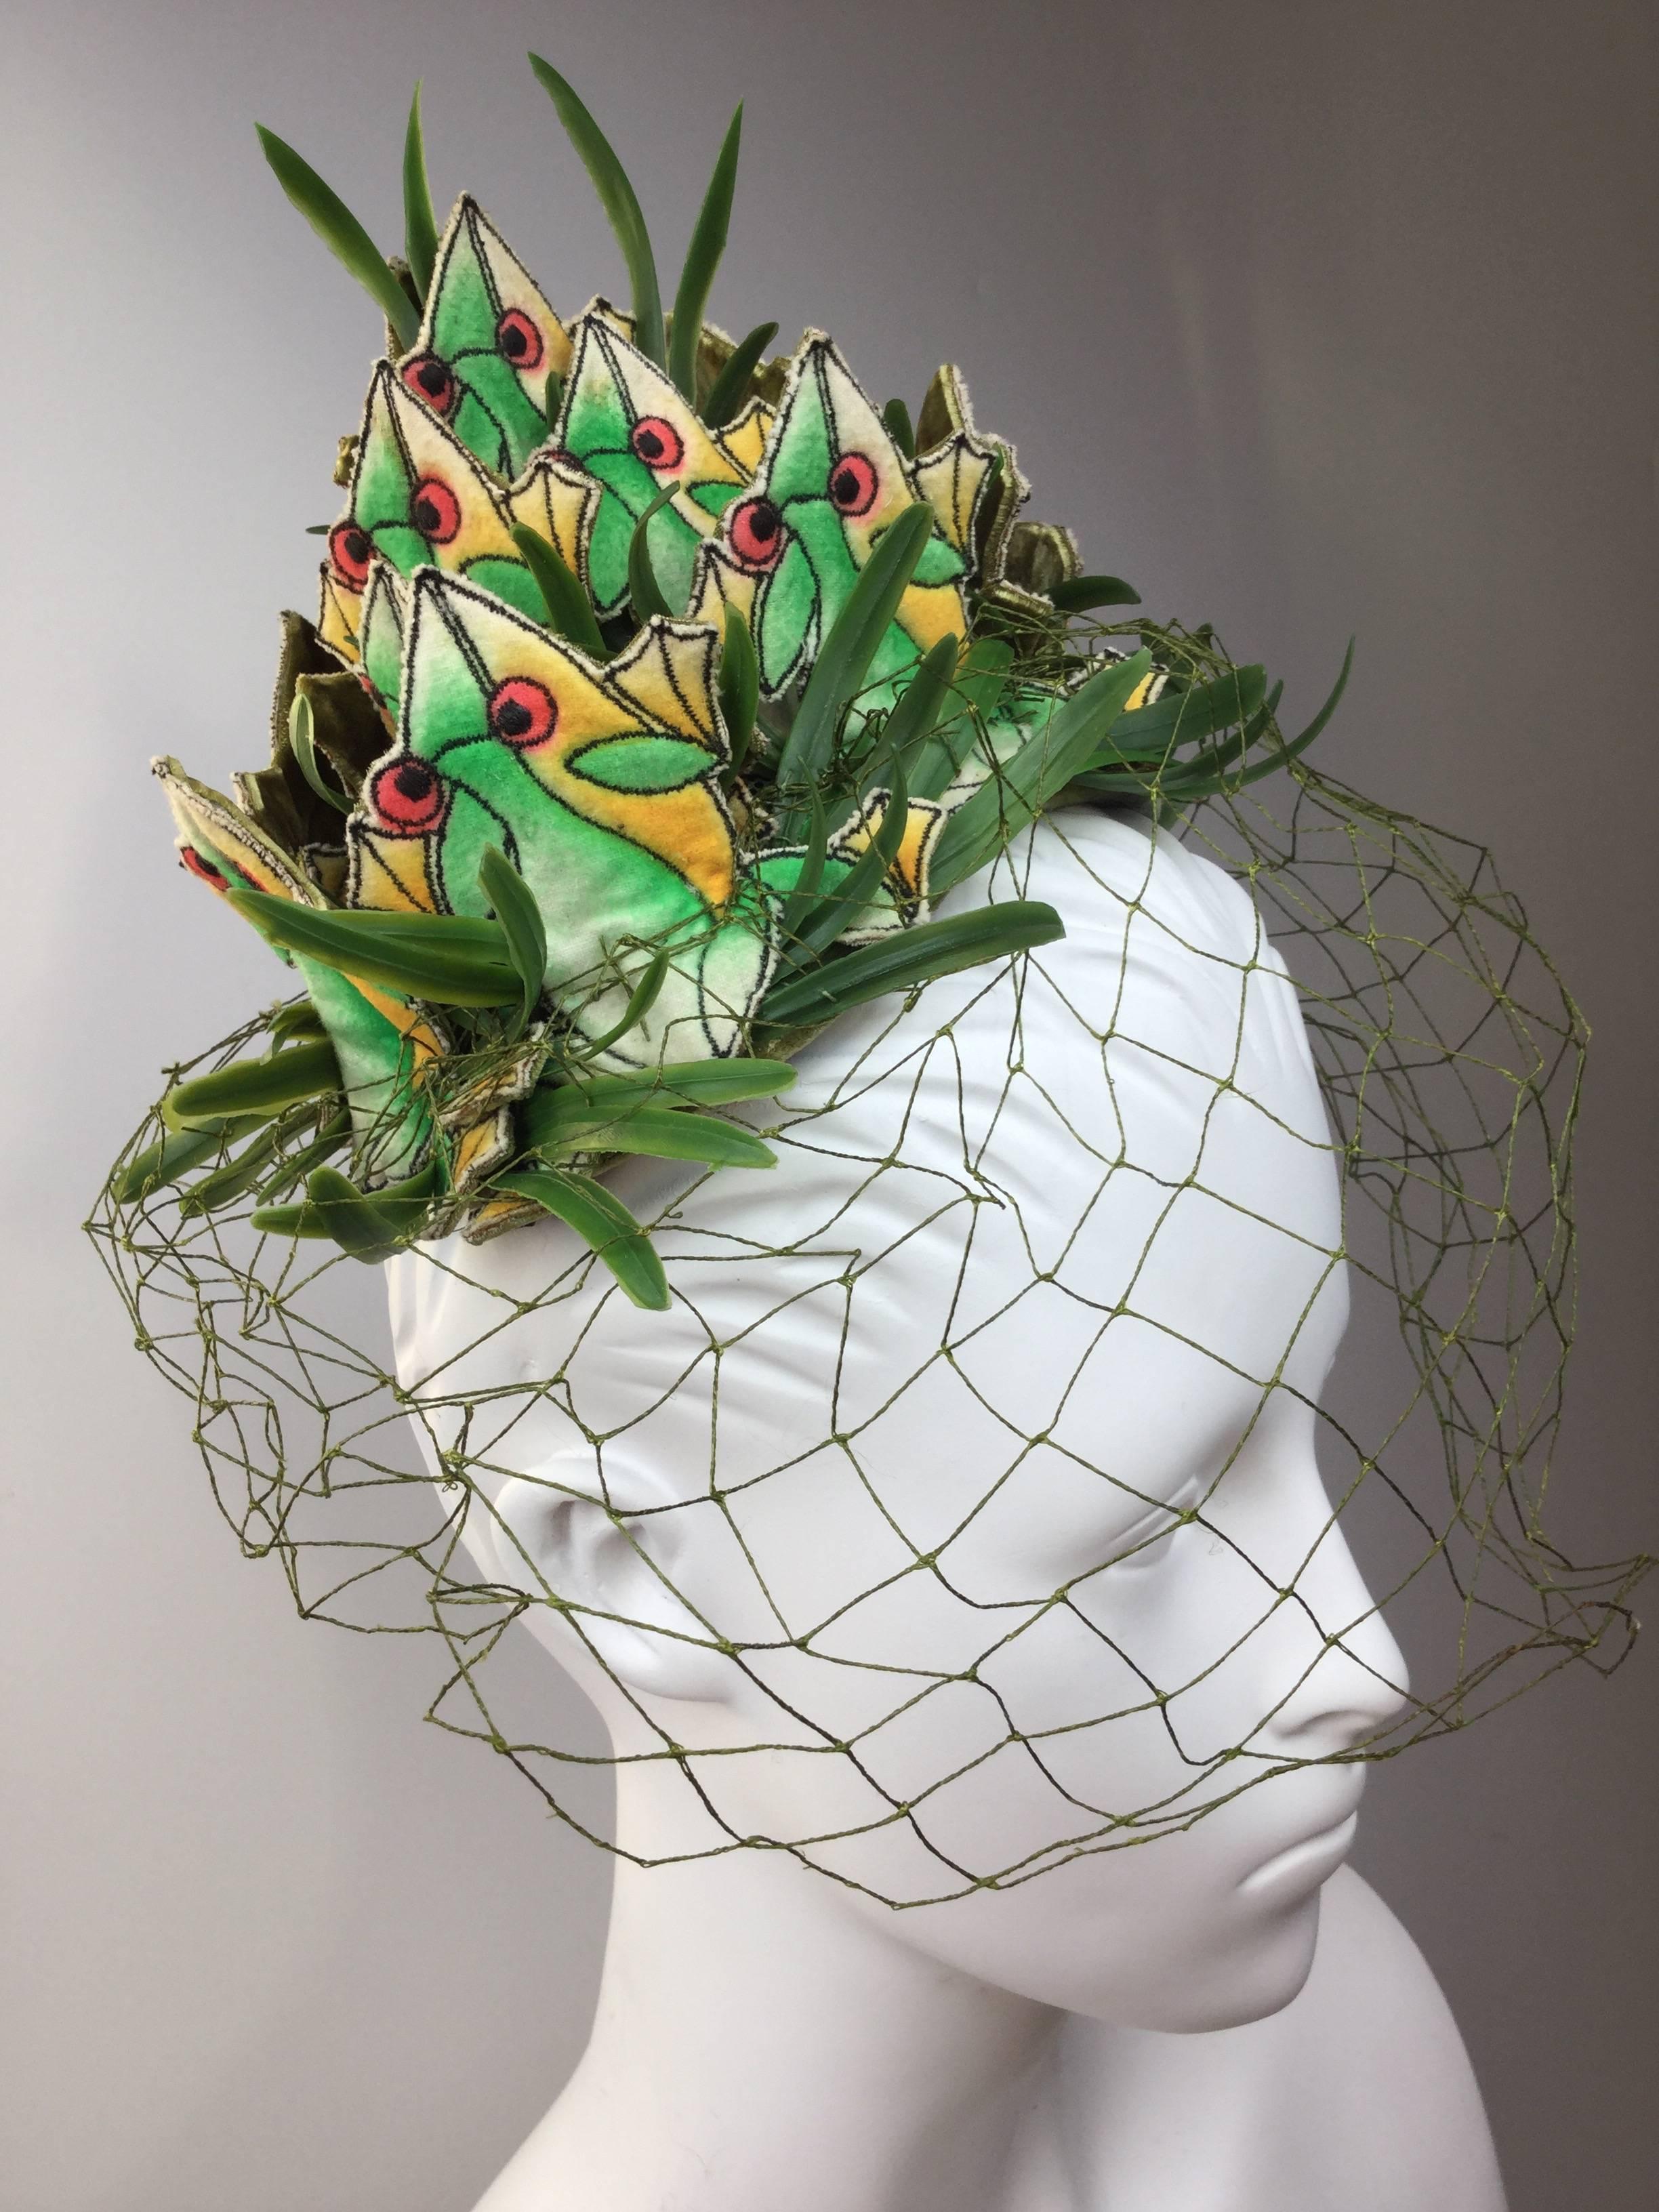 
Incredibly rare 1950's surrealistic frog hat designed by Benjamin B. Green-Field for his legendary company Bes-Ben of Chicago.

Known as Chicago's 